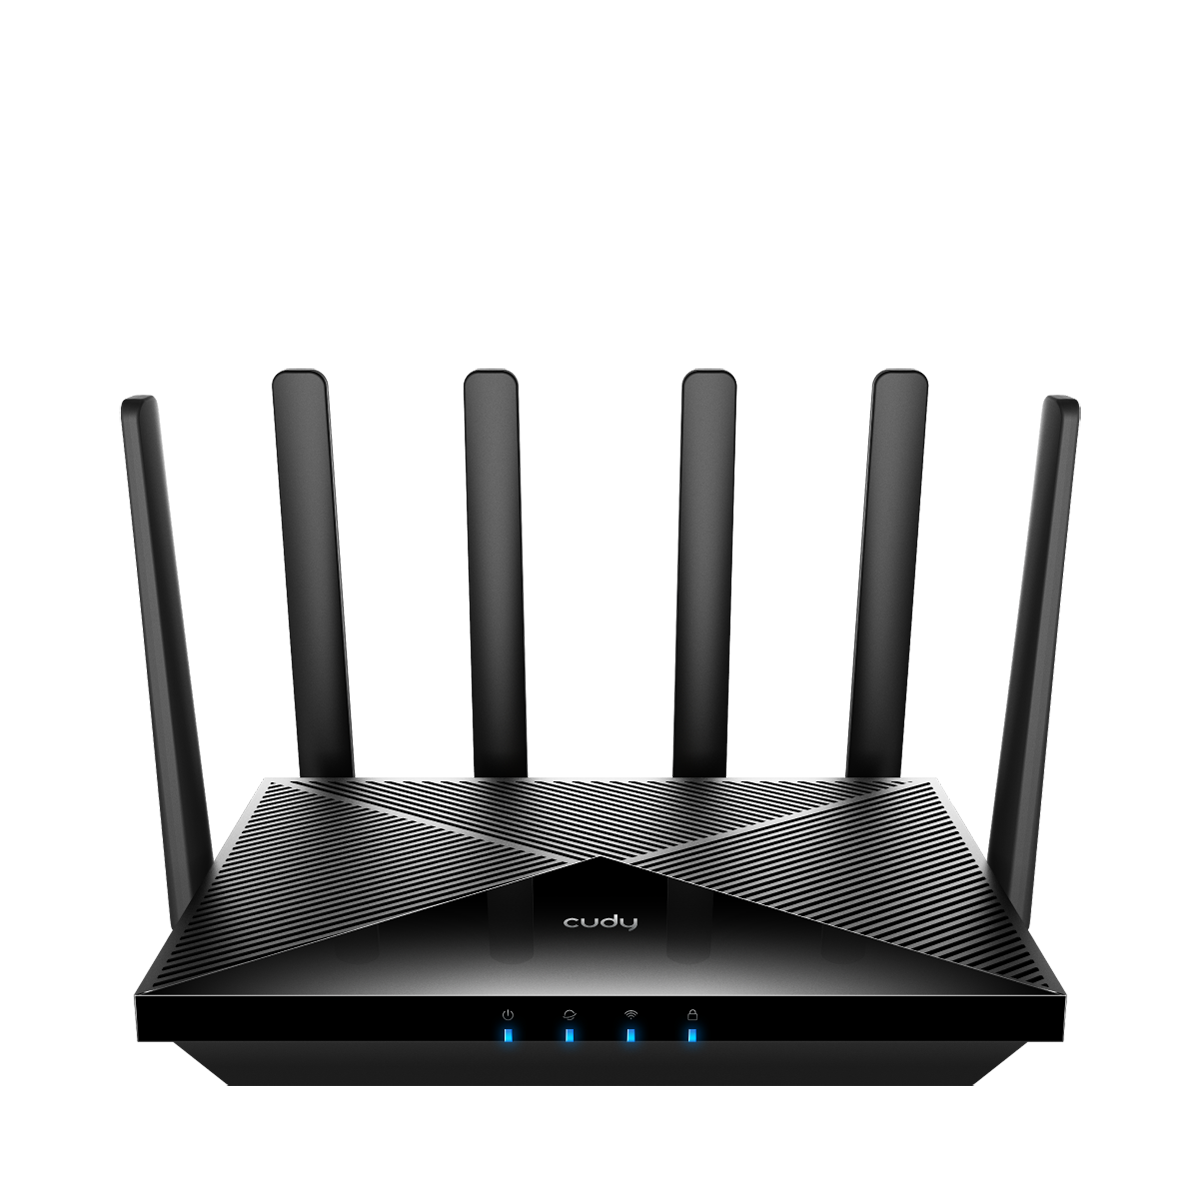 BE6500 2.5G Mesh Wi-Fi 7 Router, WR6500 1.0